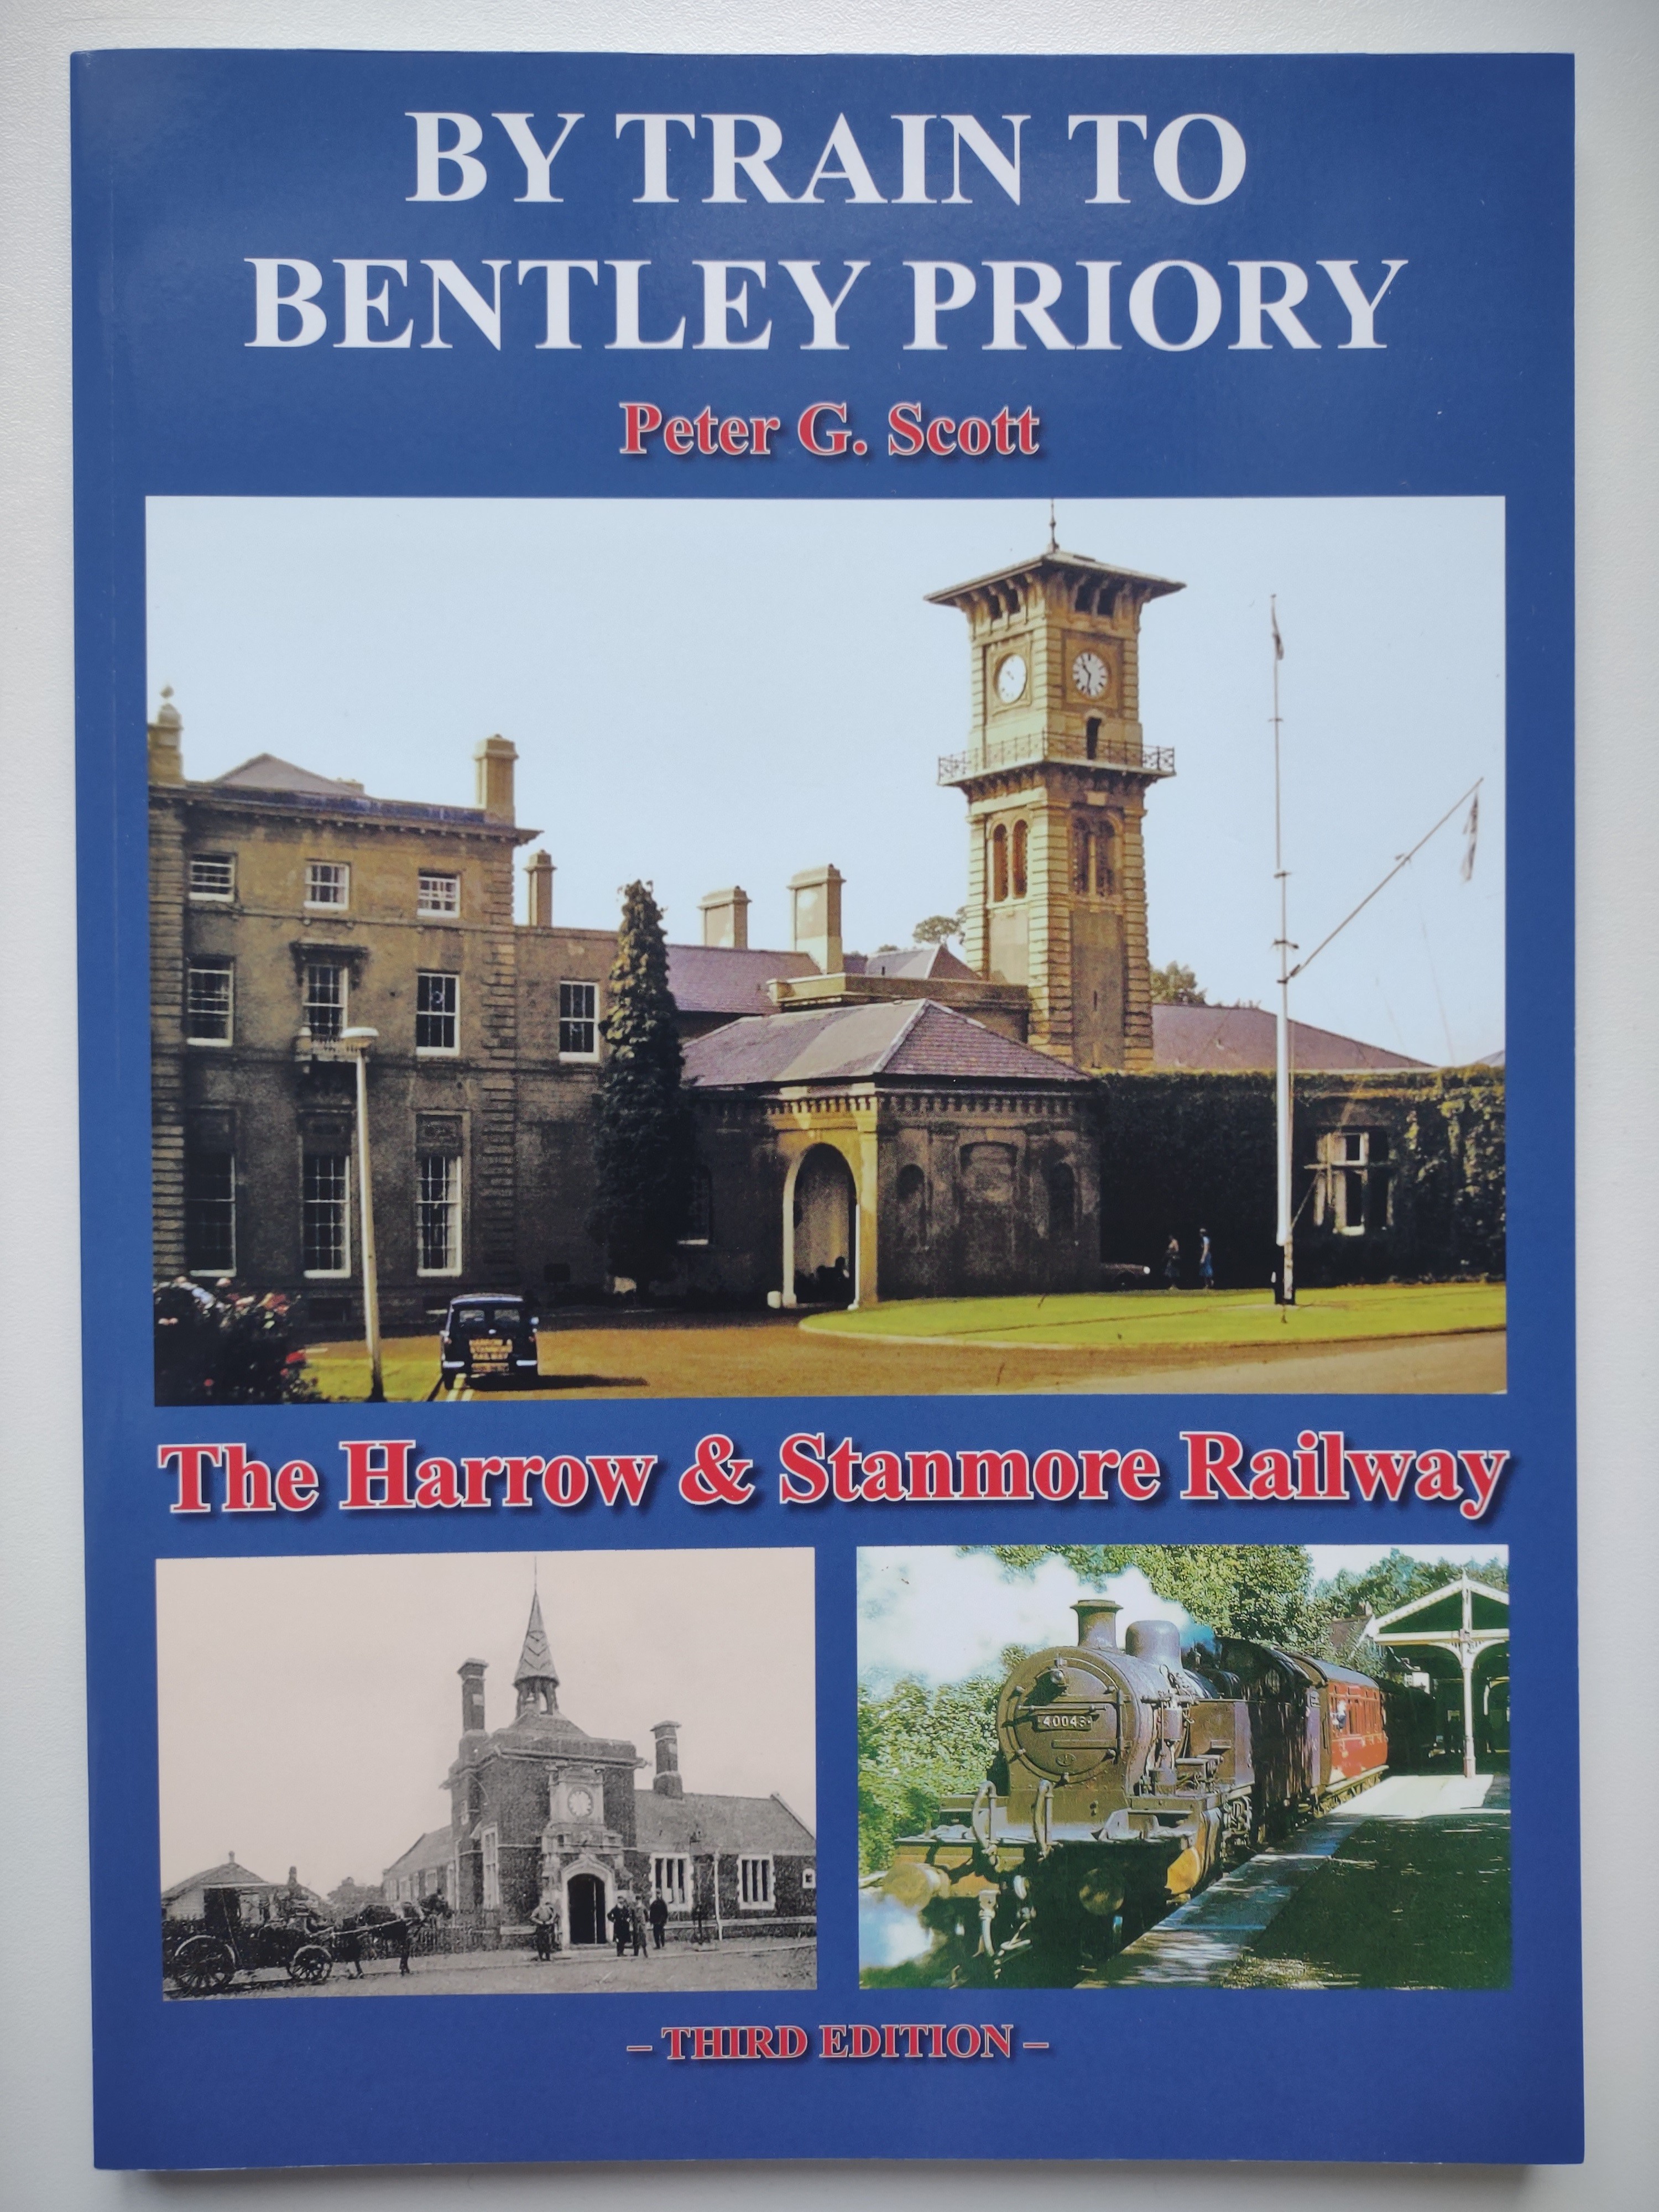 By Train to Bentley Priory